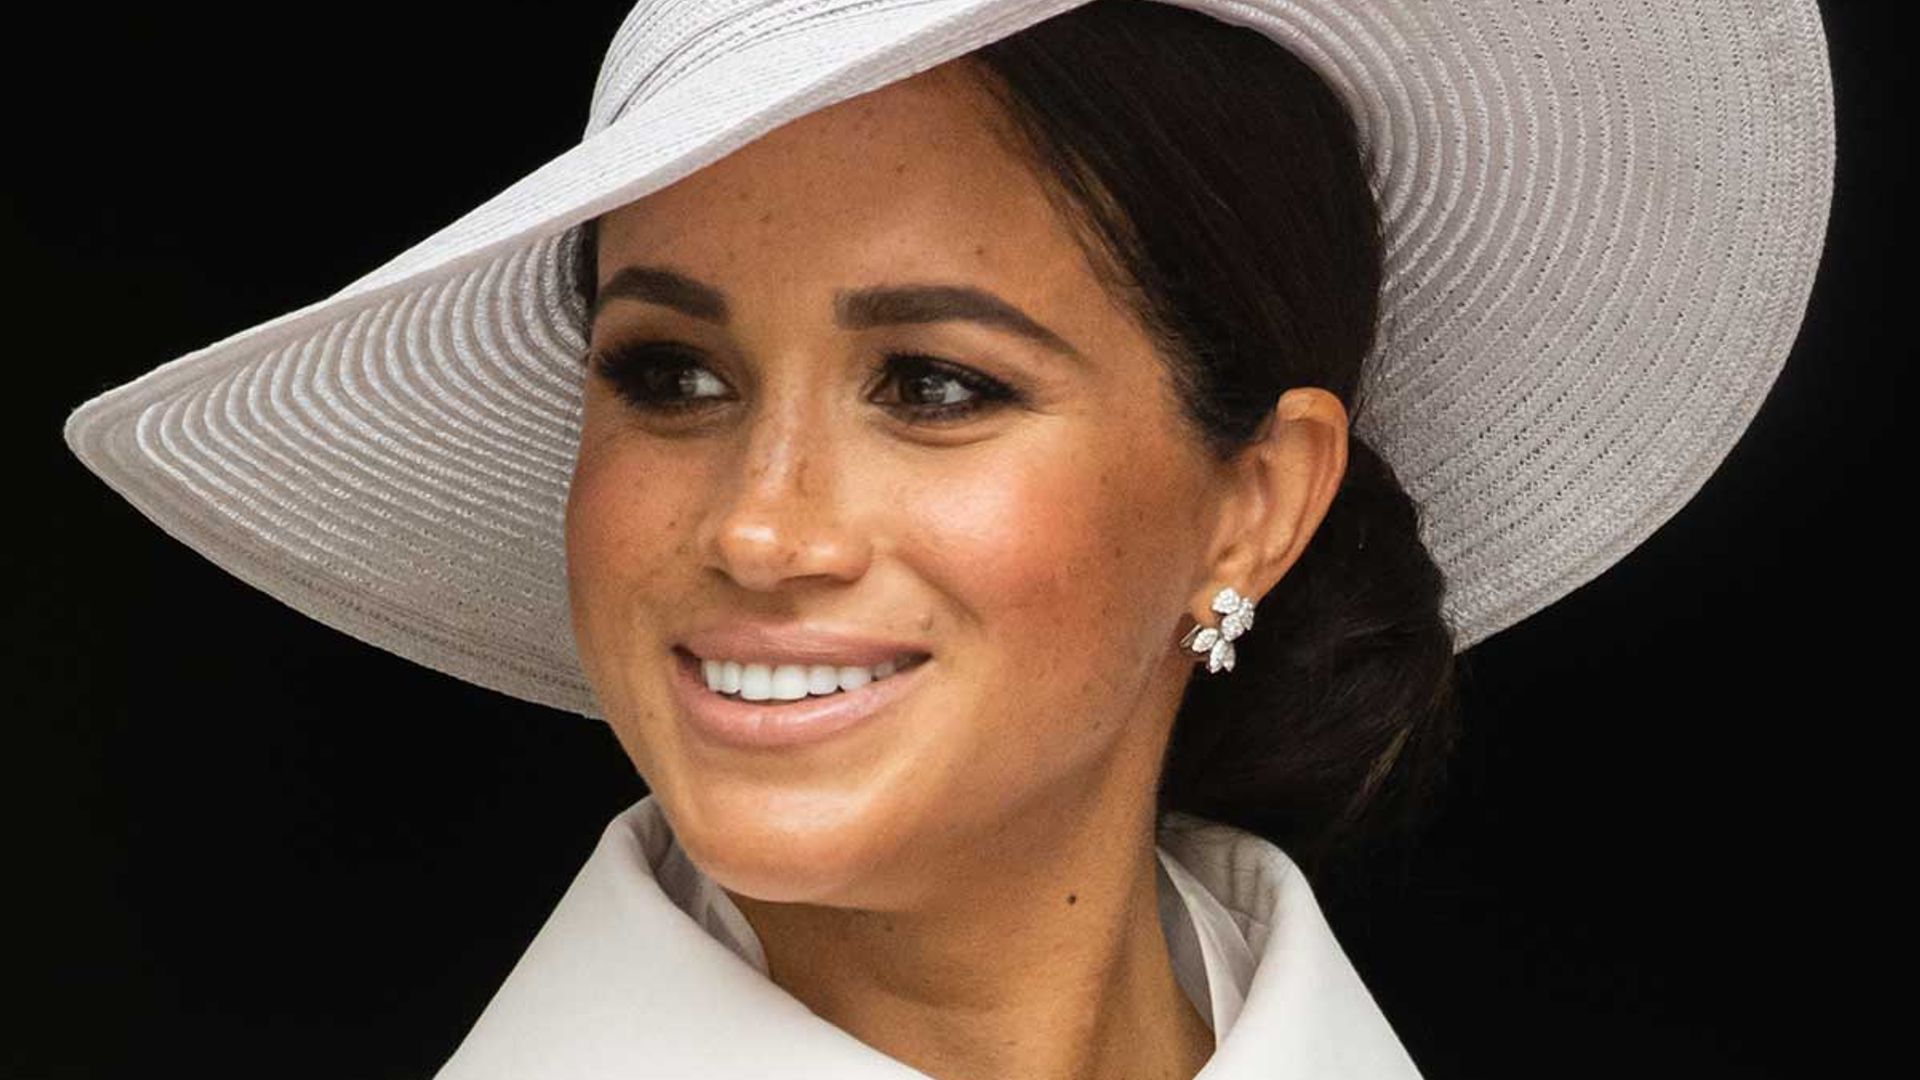 Meghan Markle's hairdresser reveals what Archie and Lilibet are really like